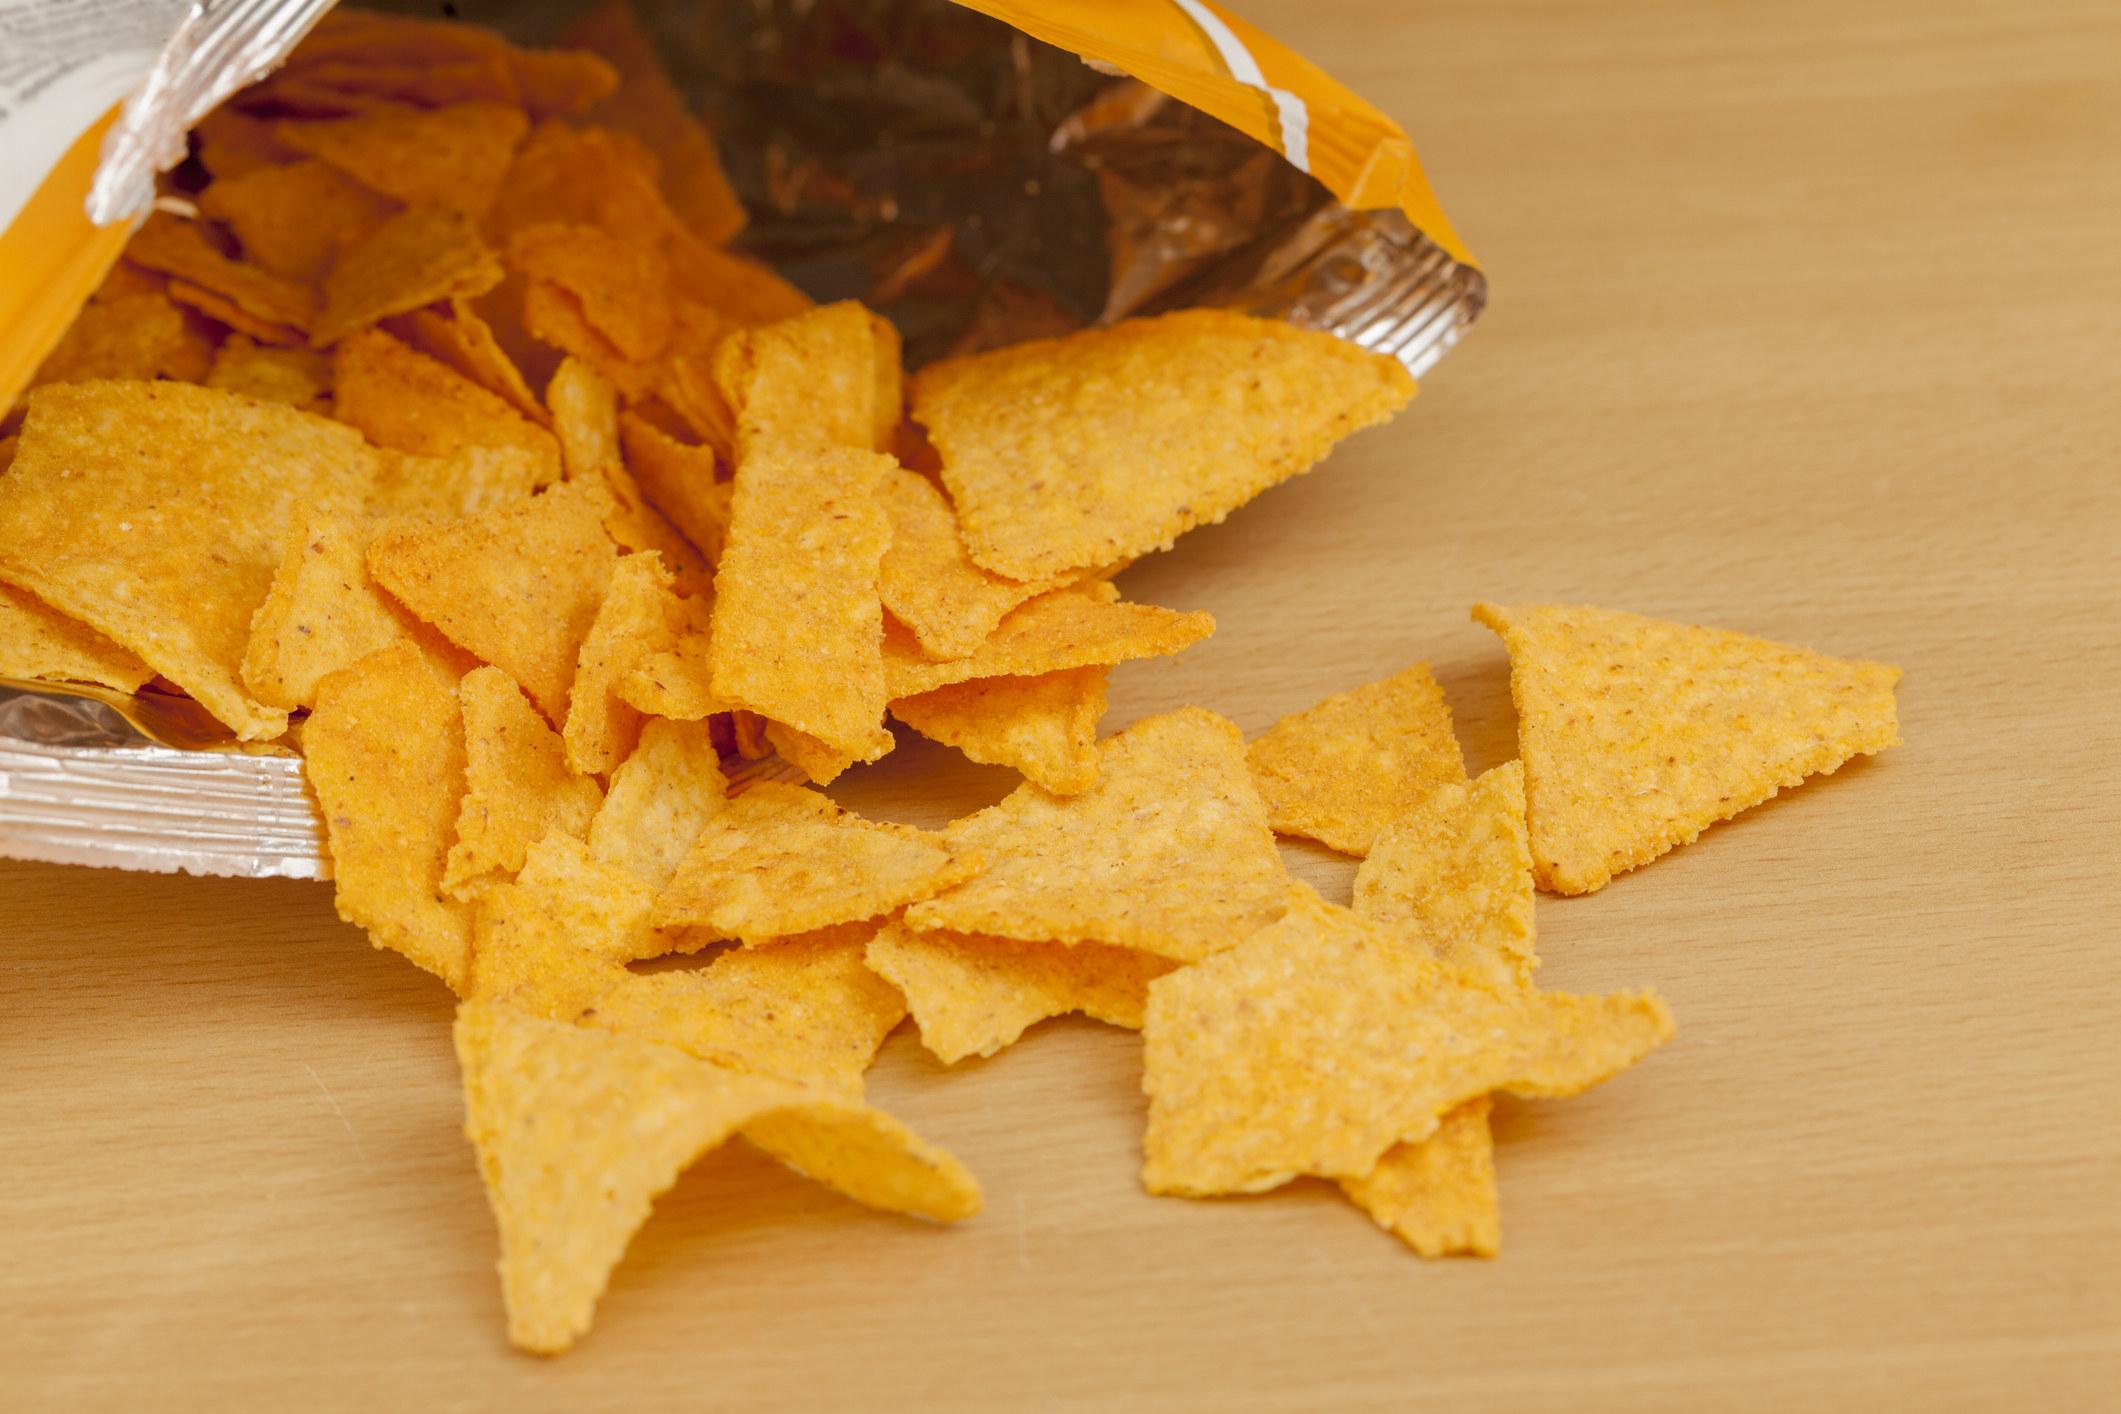 Doritos chips on a wooden table.